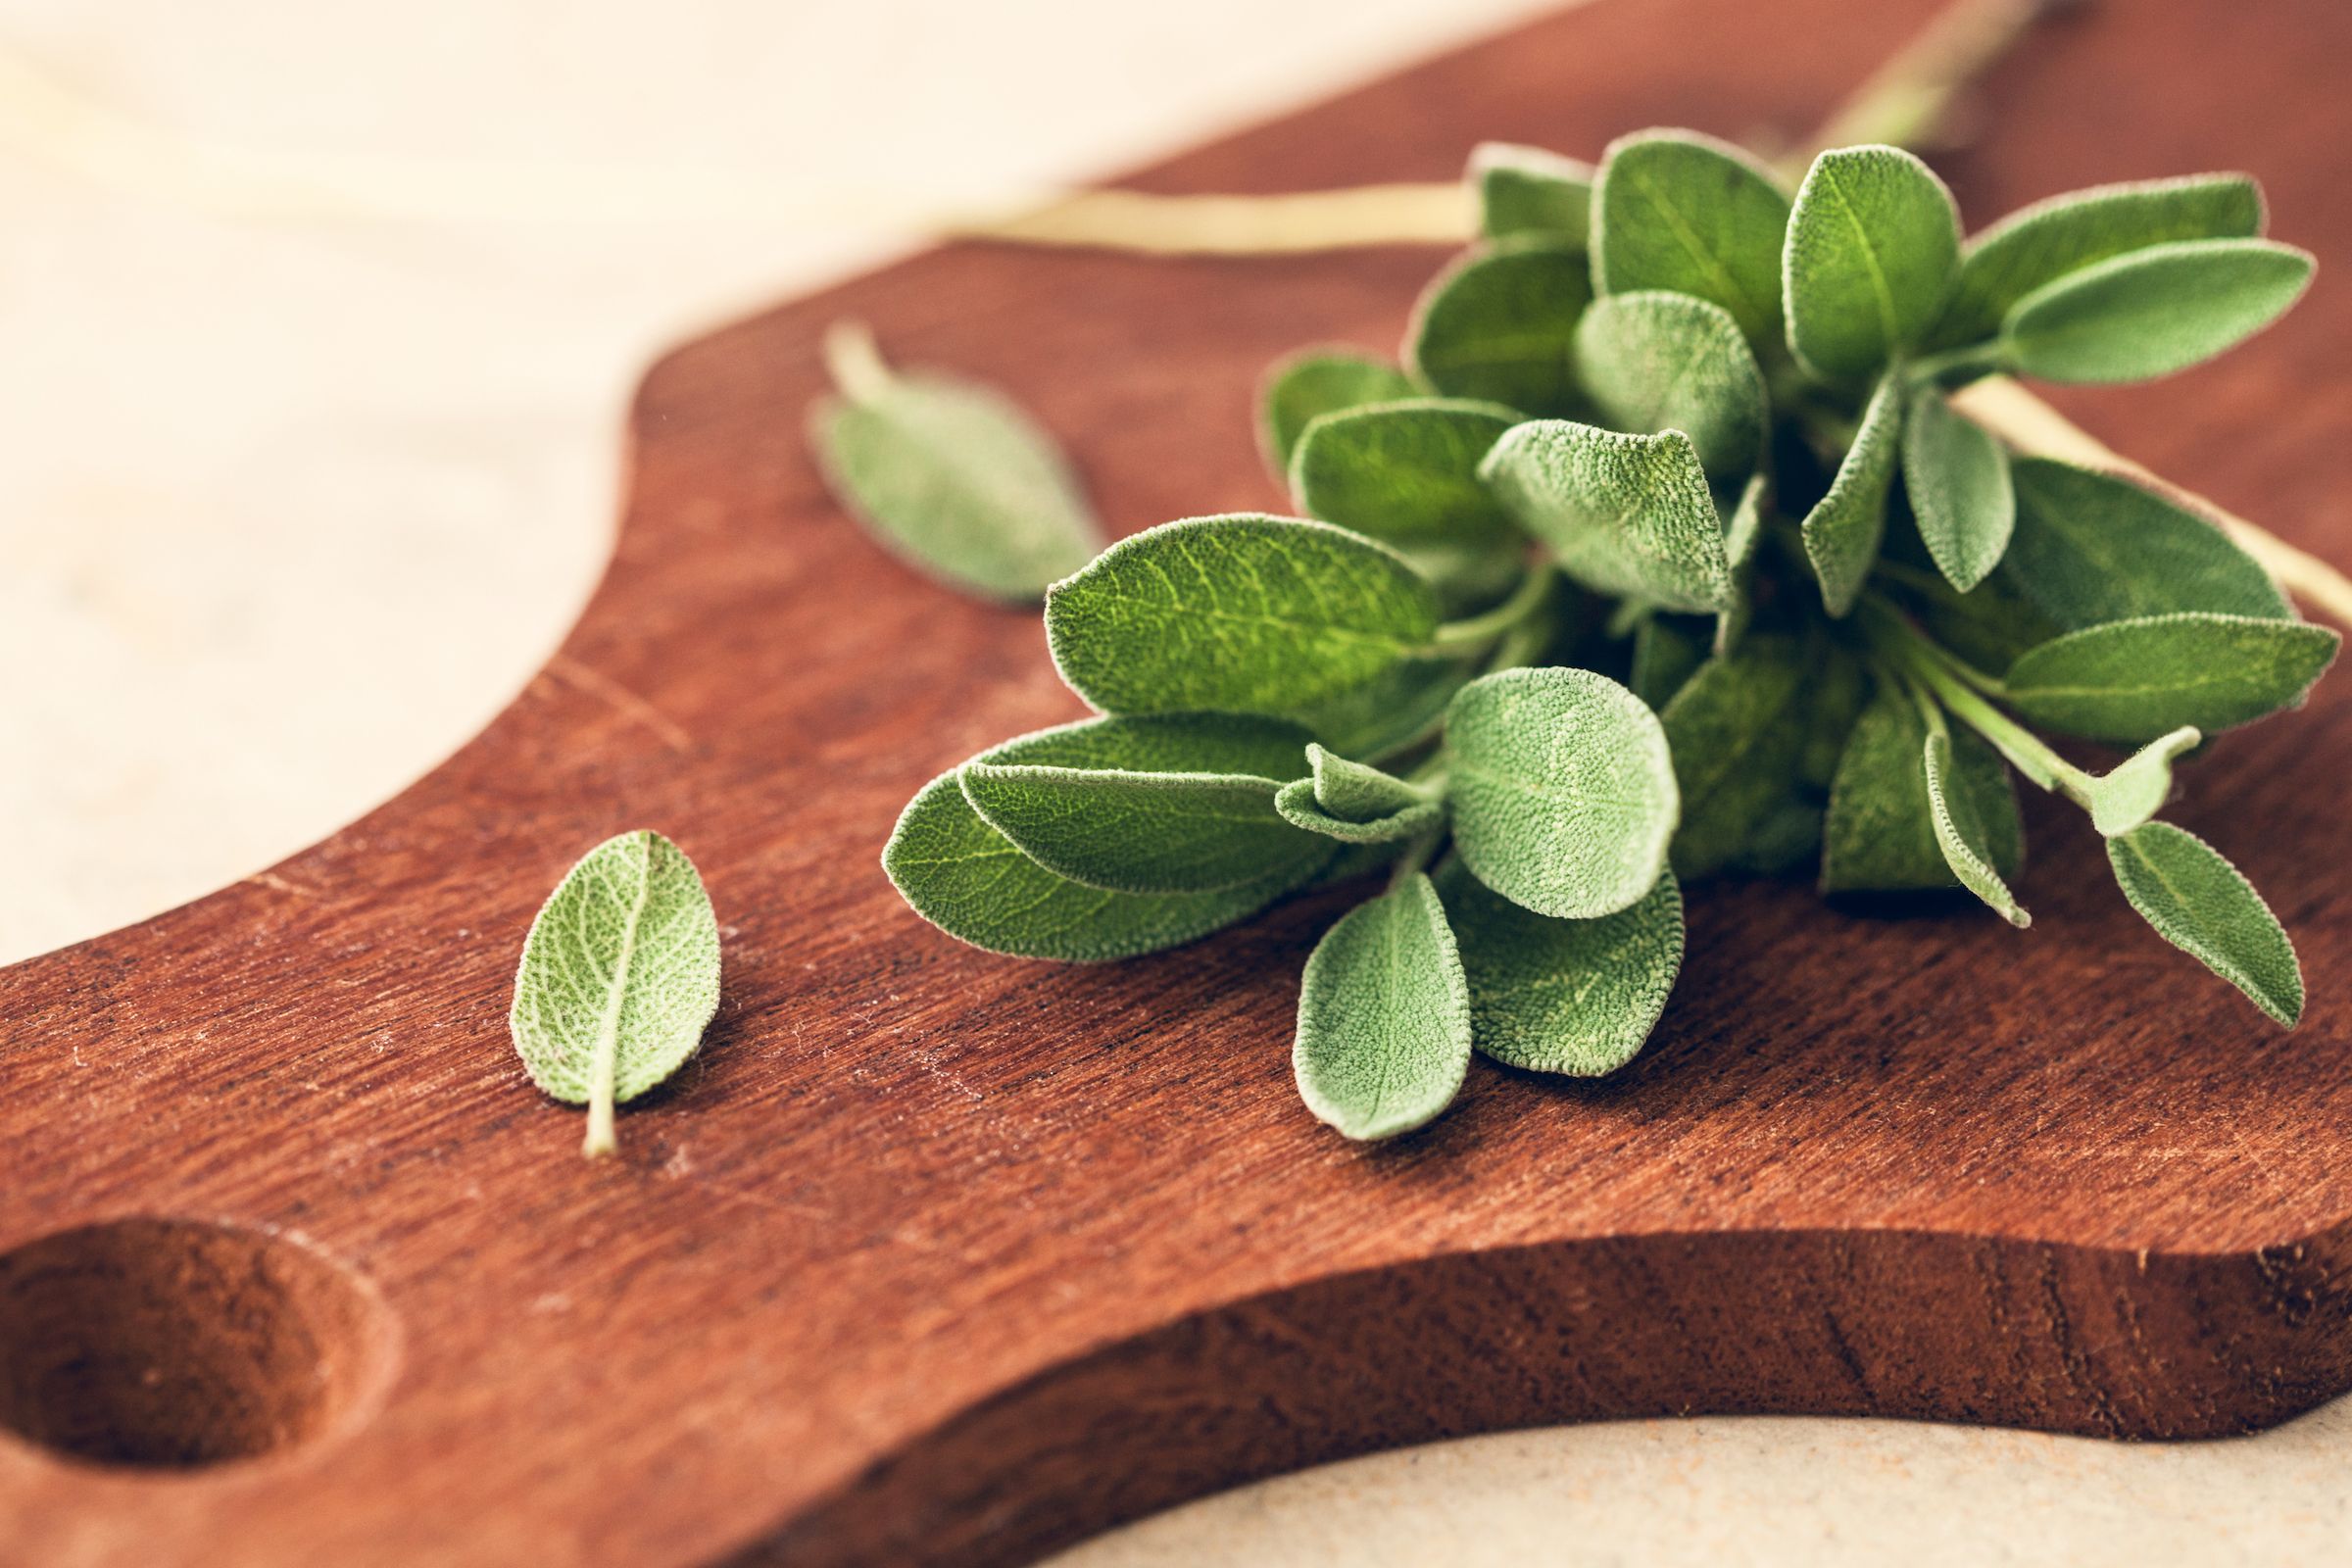 What Is Sage? And How Do You Use It?